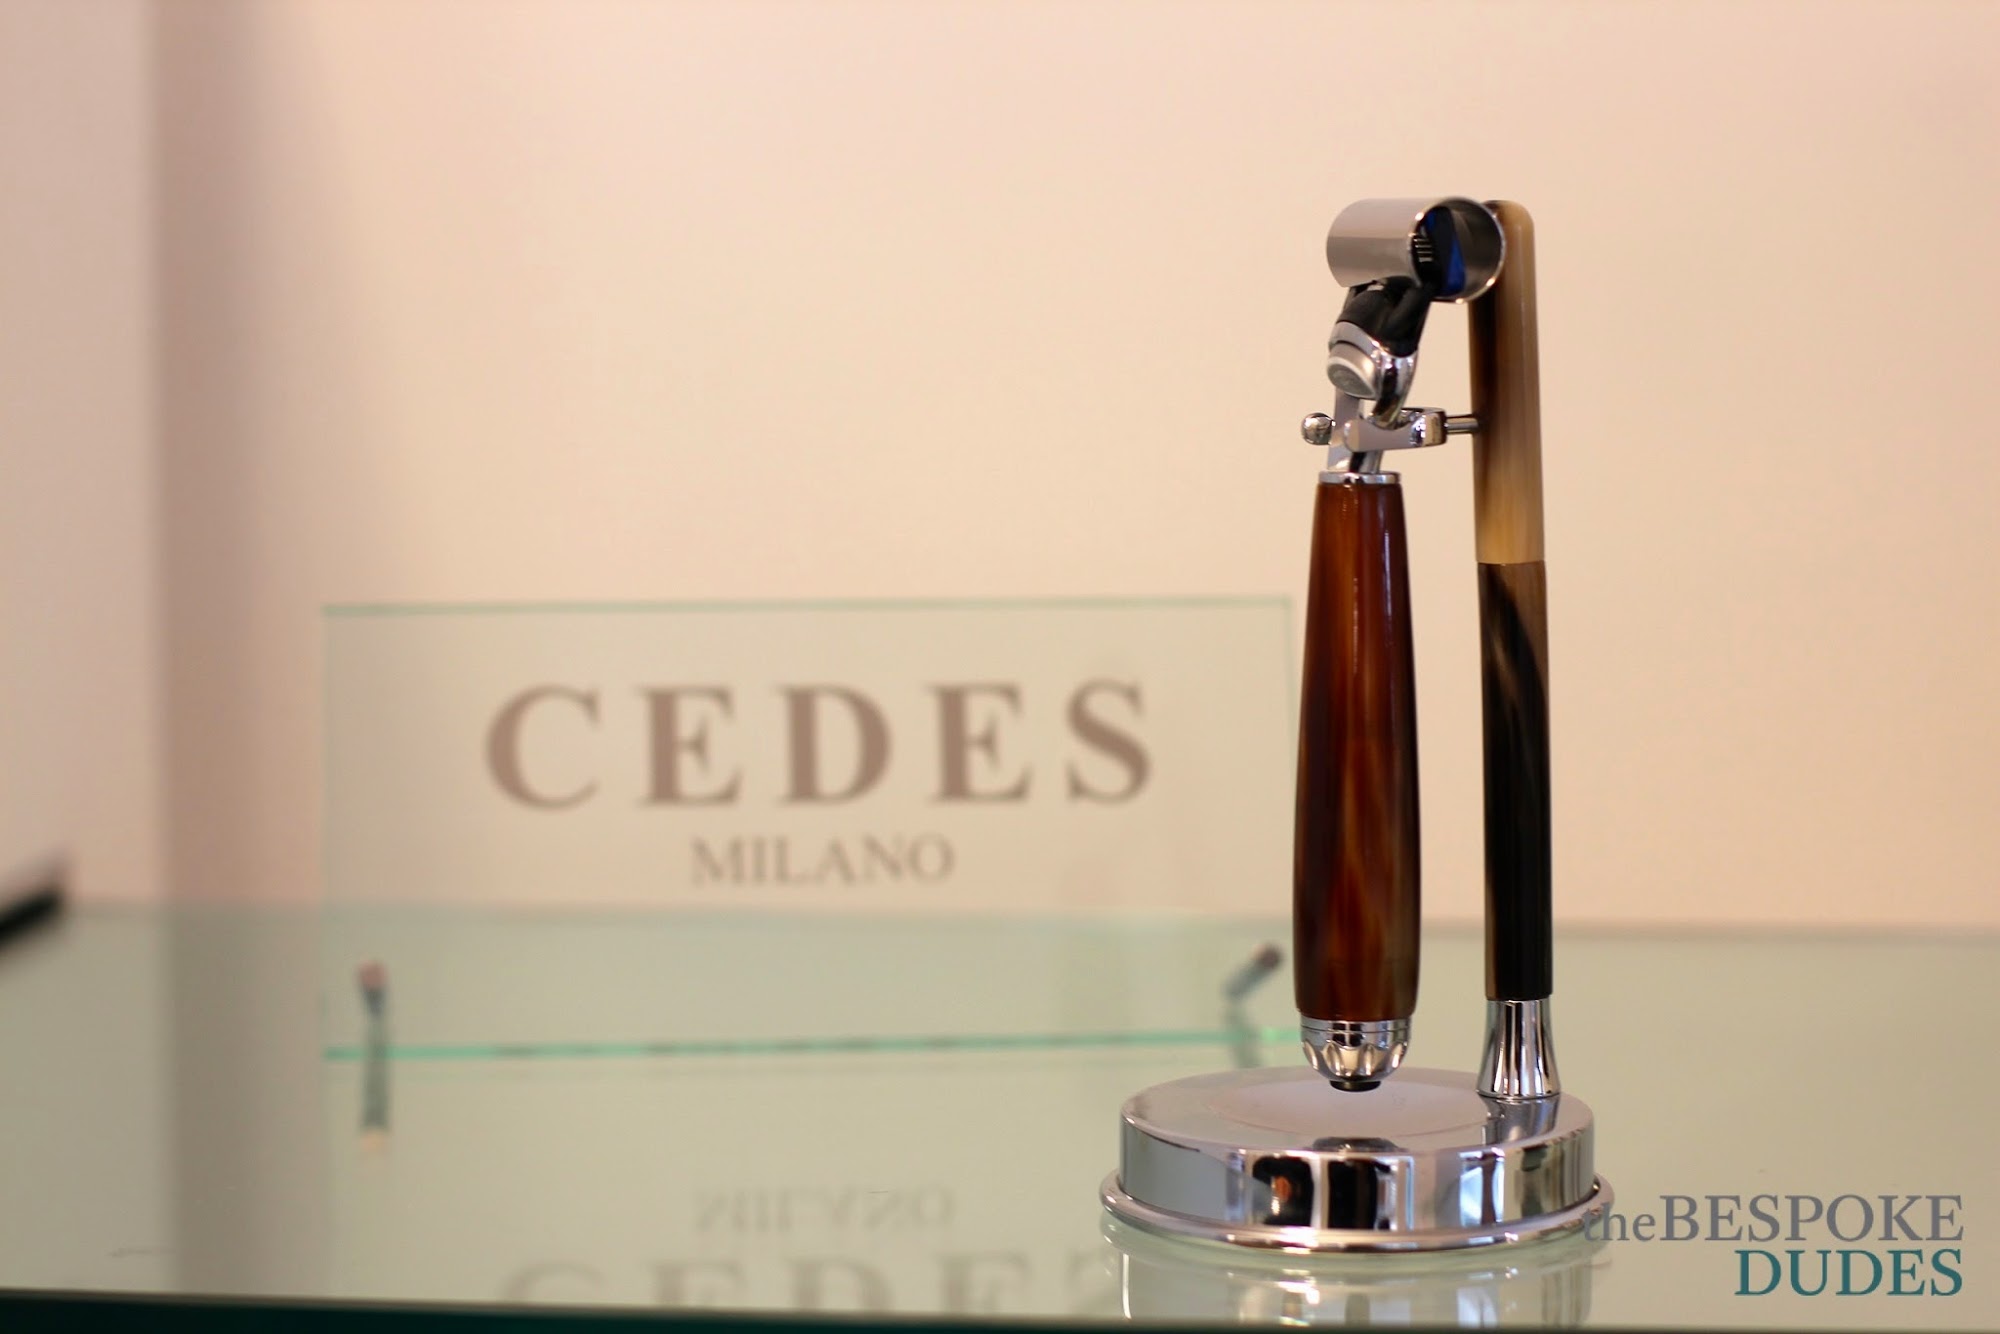 Dude Reviewed - Cedes Milano